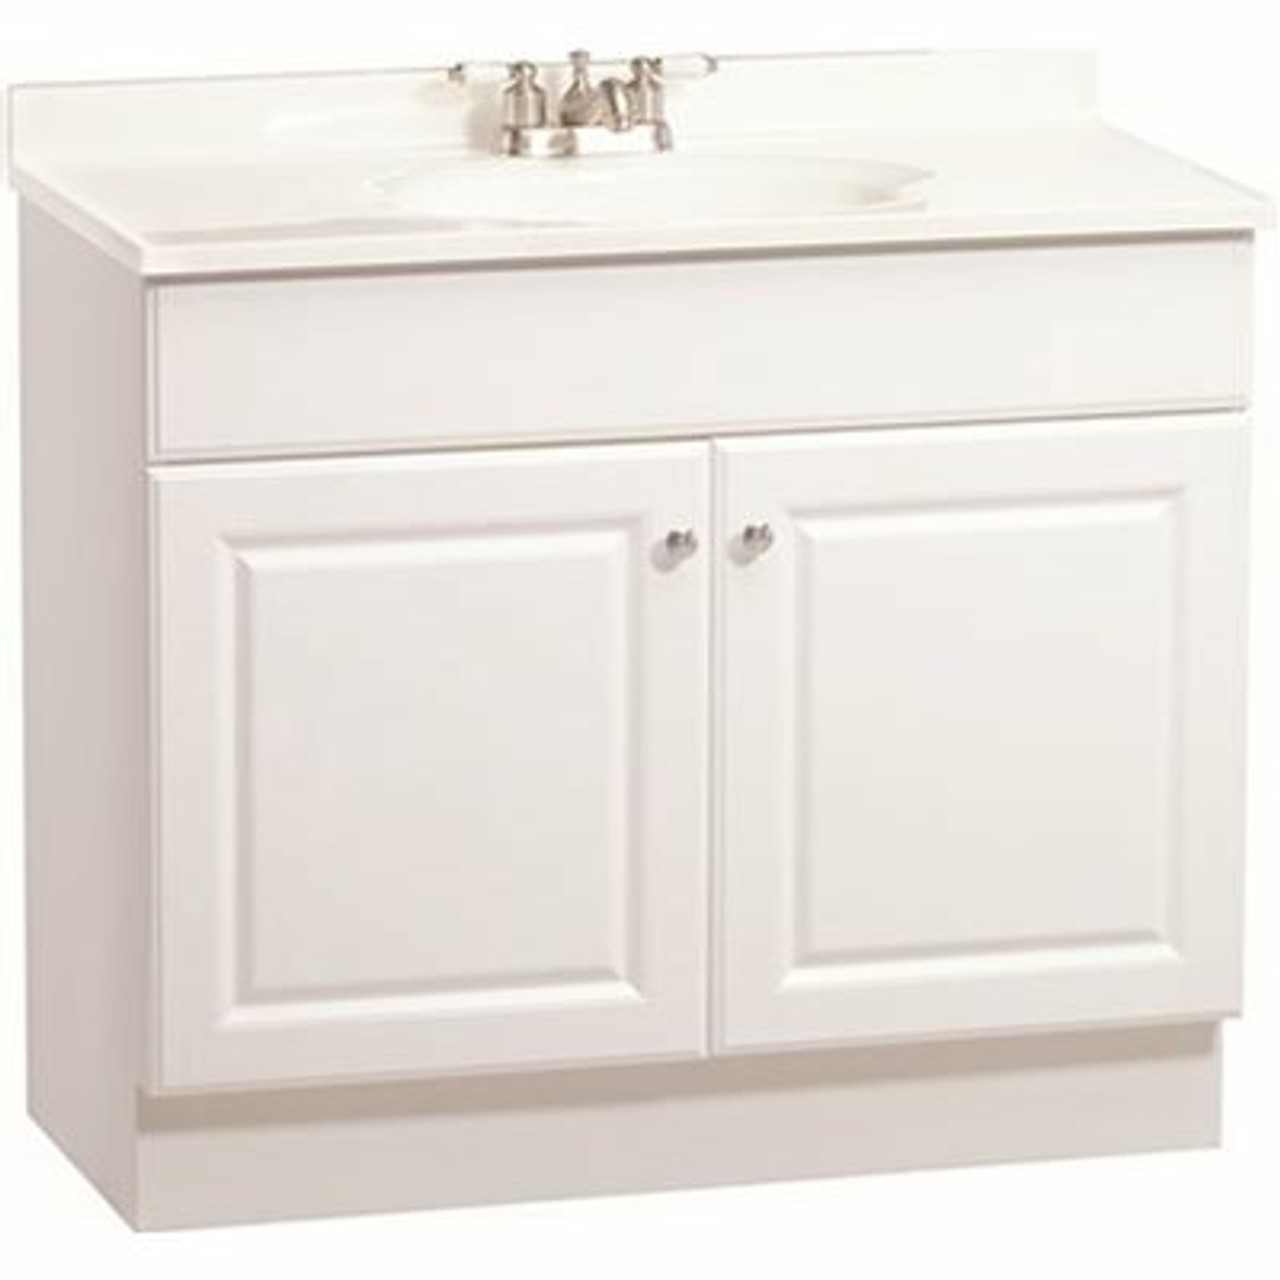 Rsi Home Products 36 In. X 31 In. X 18 In. Richmond Bathroom Vanity Cabinet With Top With 2-Door In White